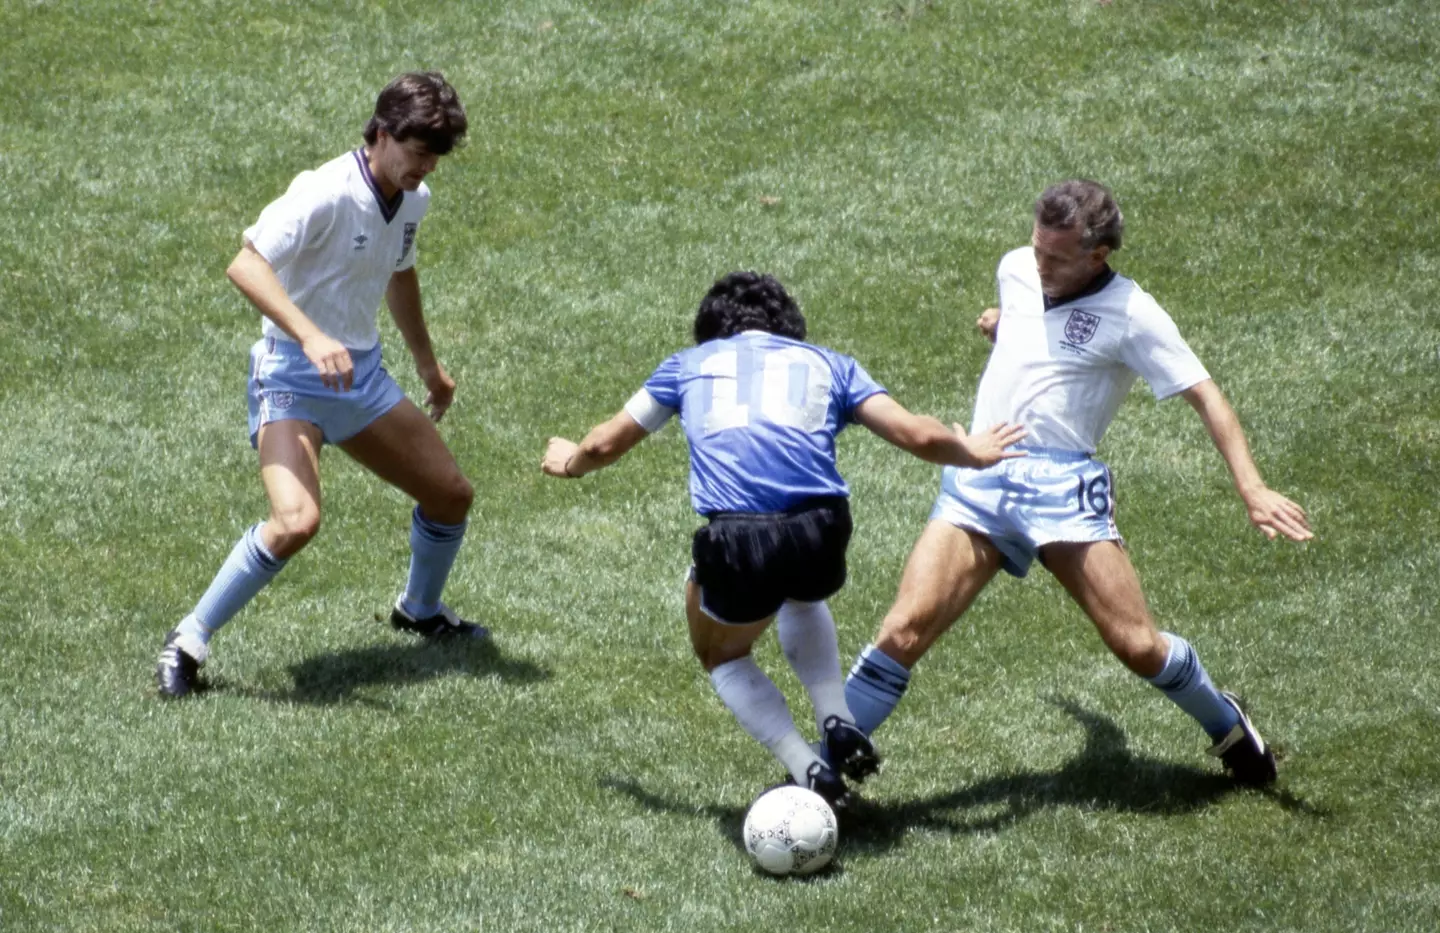 Maradona wore the shirt in Argentina's 2-1 win over England at the 1986 World Cup (Image: PA)